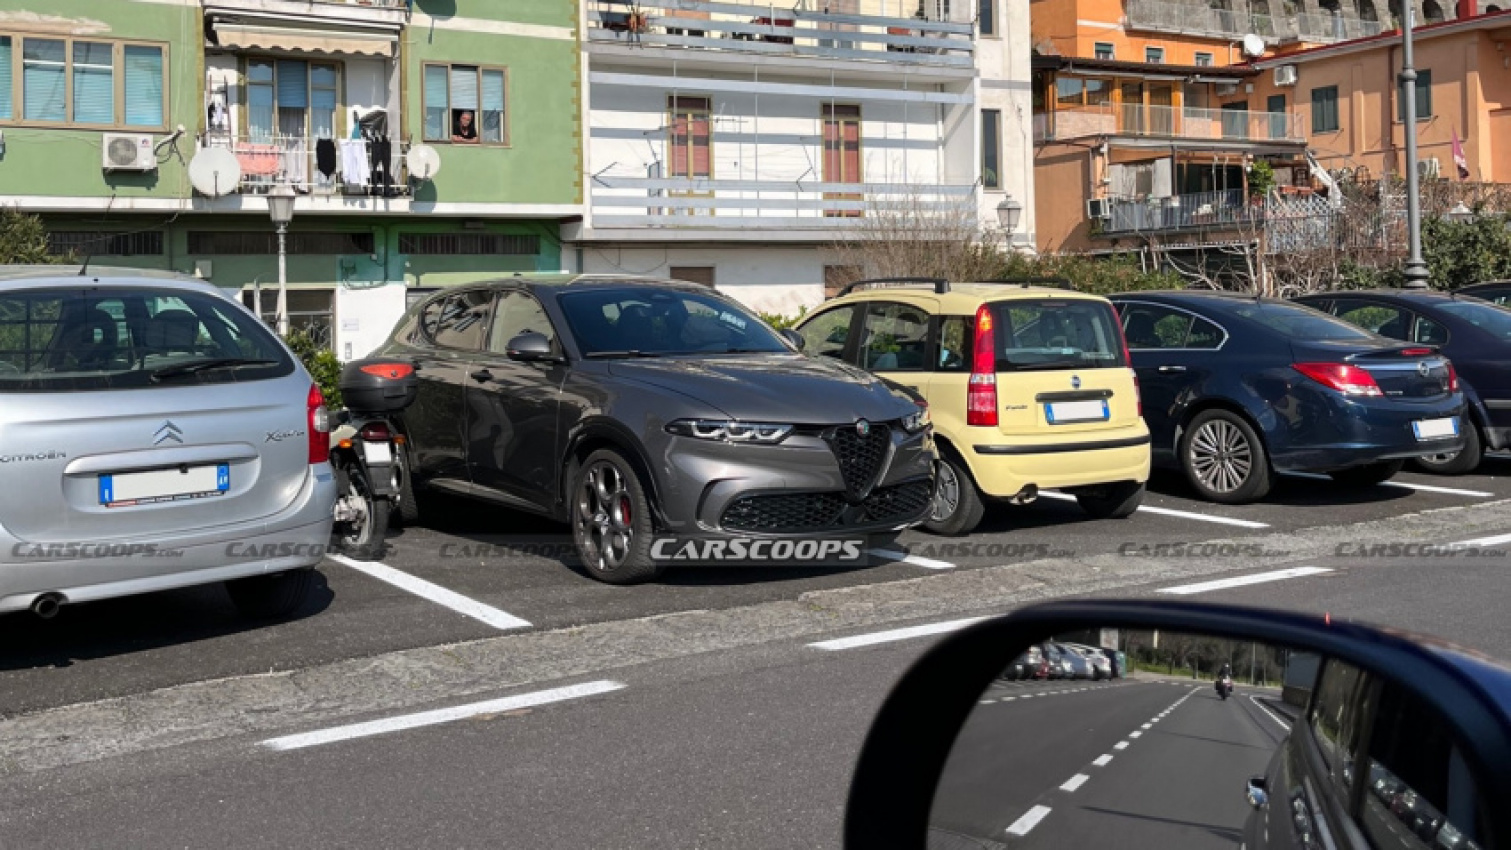 alfa romeo, autos, cars, news, alfa romeo scoops, alfa romeo tonale, scoops, alfa romeo tonale spotted in italy just in time for valentine’s day